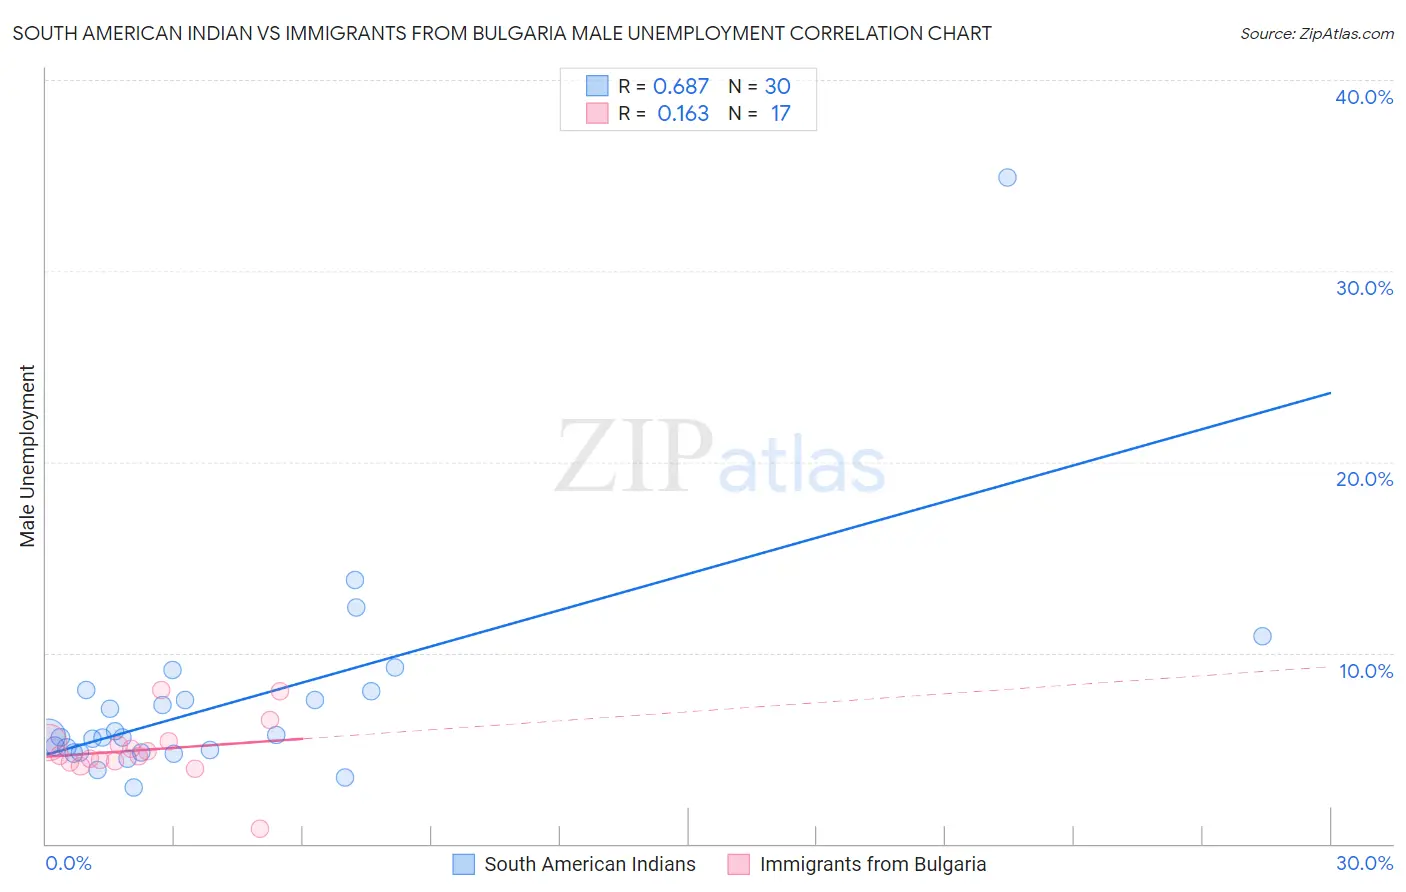 South American Indian vs Immigrants from Bulgaria Male Unemployment